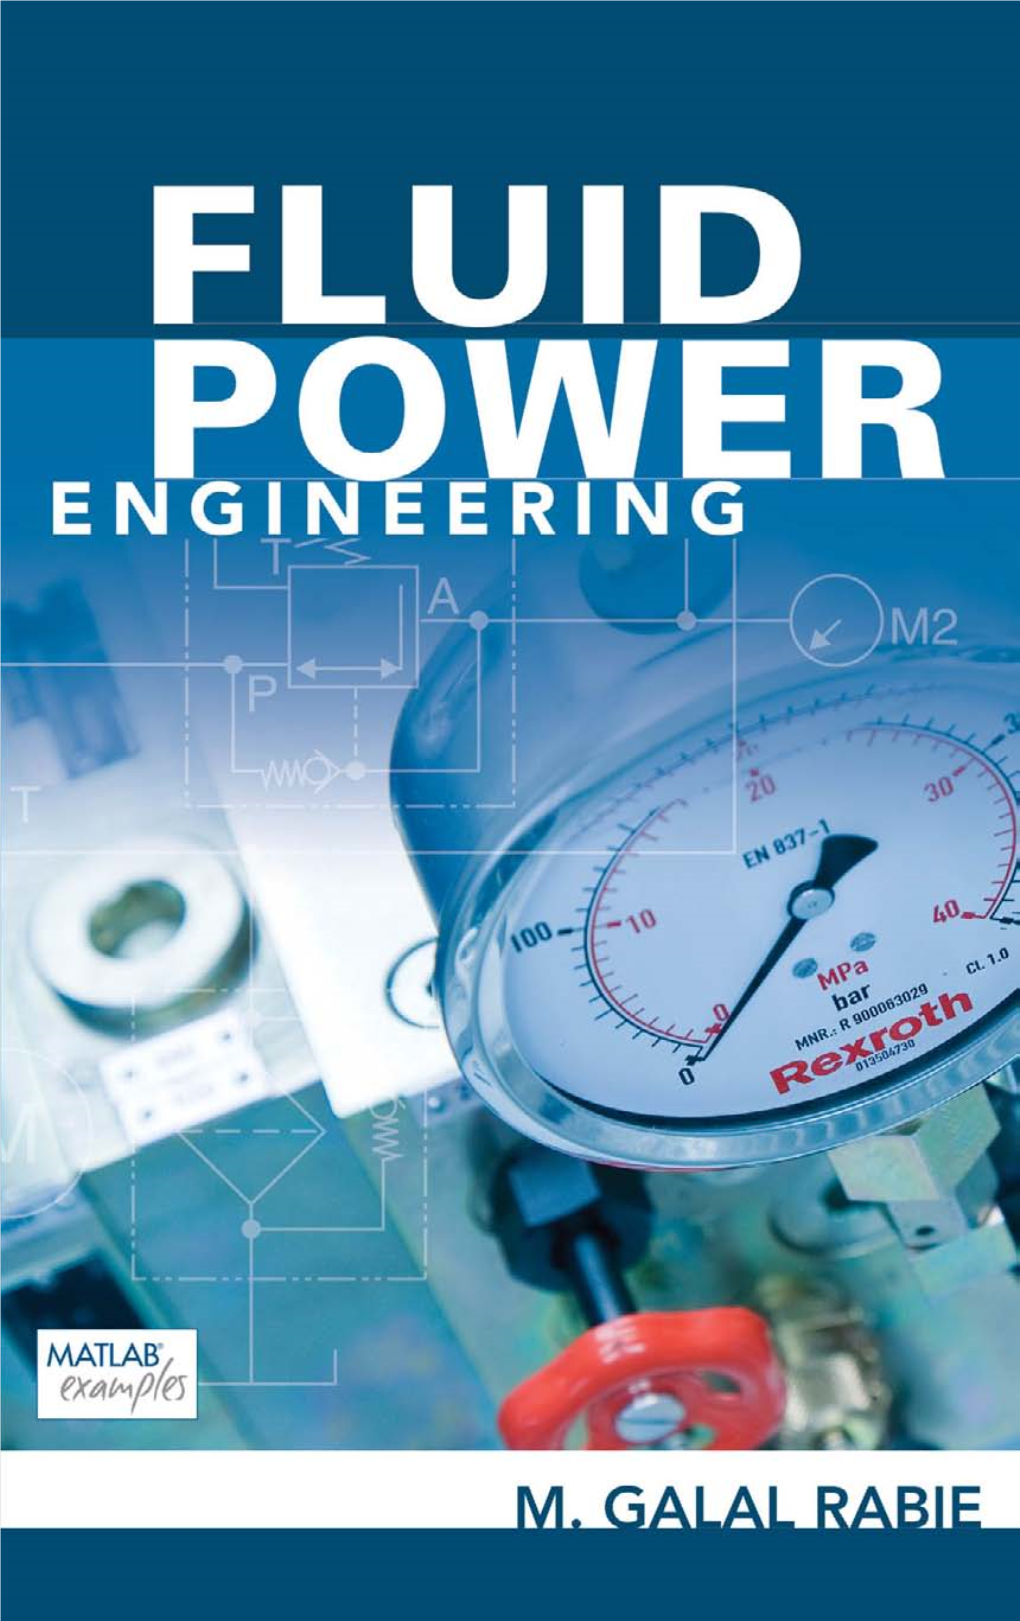 Fluid Power Engineering This Page Intentionally Left Blank Fluid Power Engineering